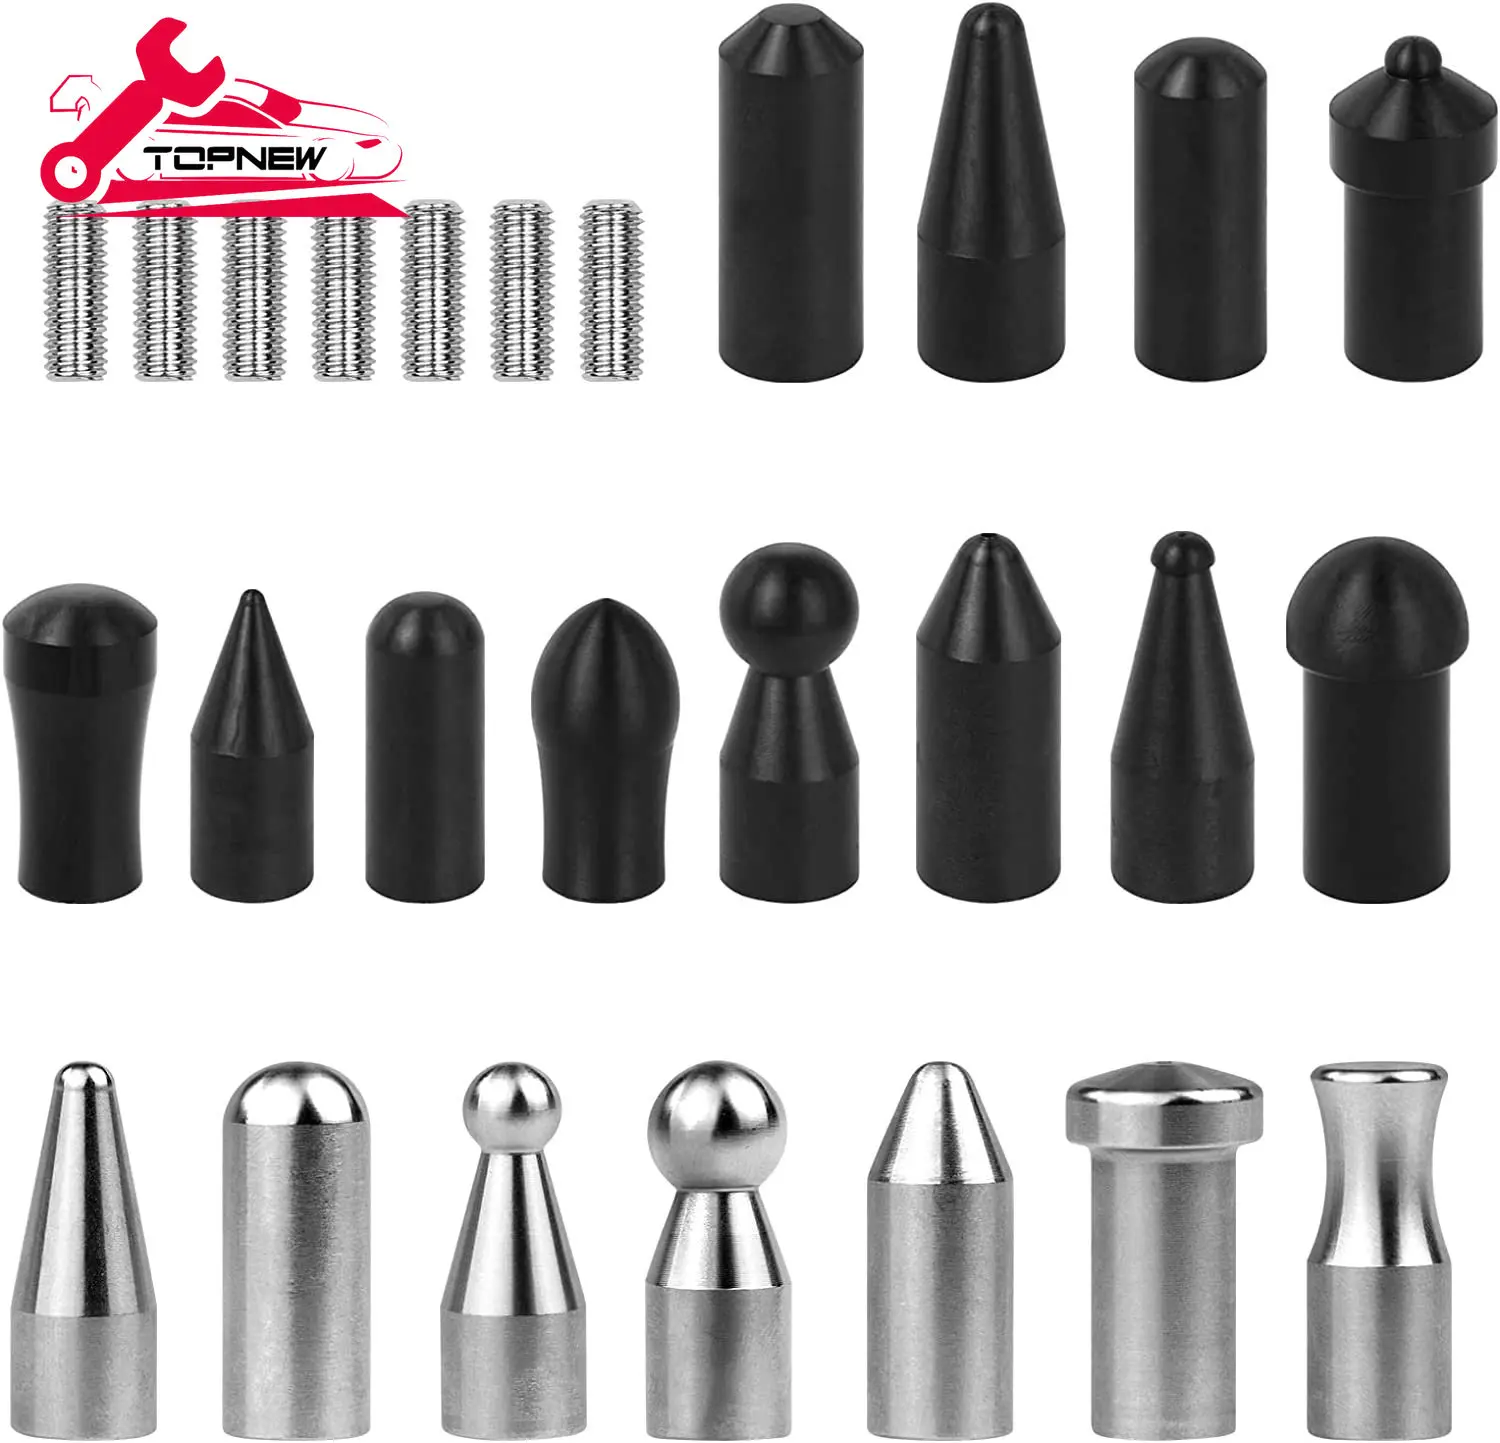 

Paintless Dent Repair Tools Repair Tip Stainless Steel and Rubber Awl Heads Adapt To The Rod Complete Set of Replacement Head